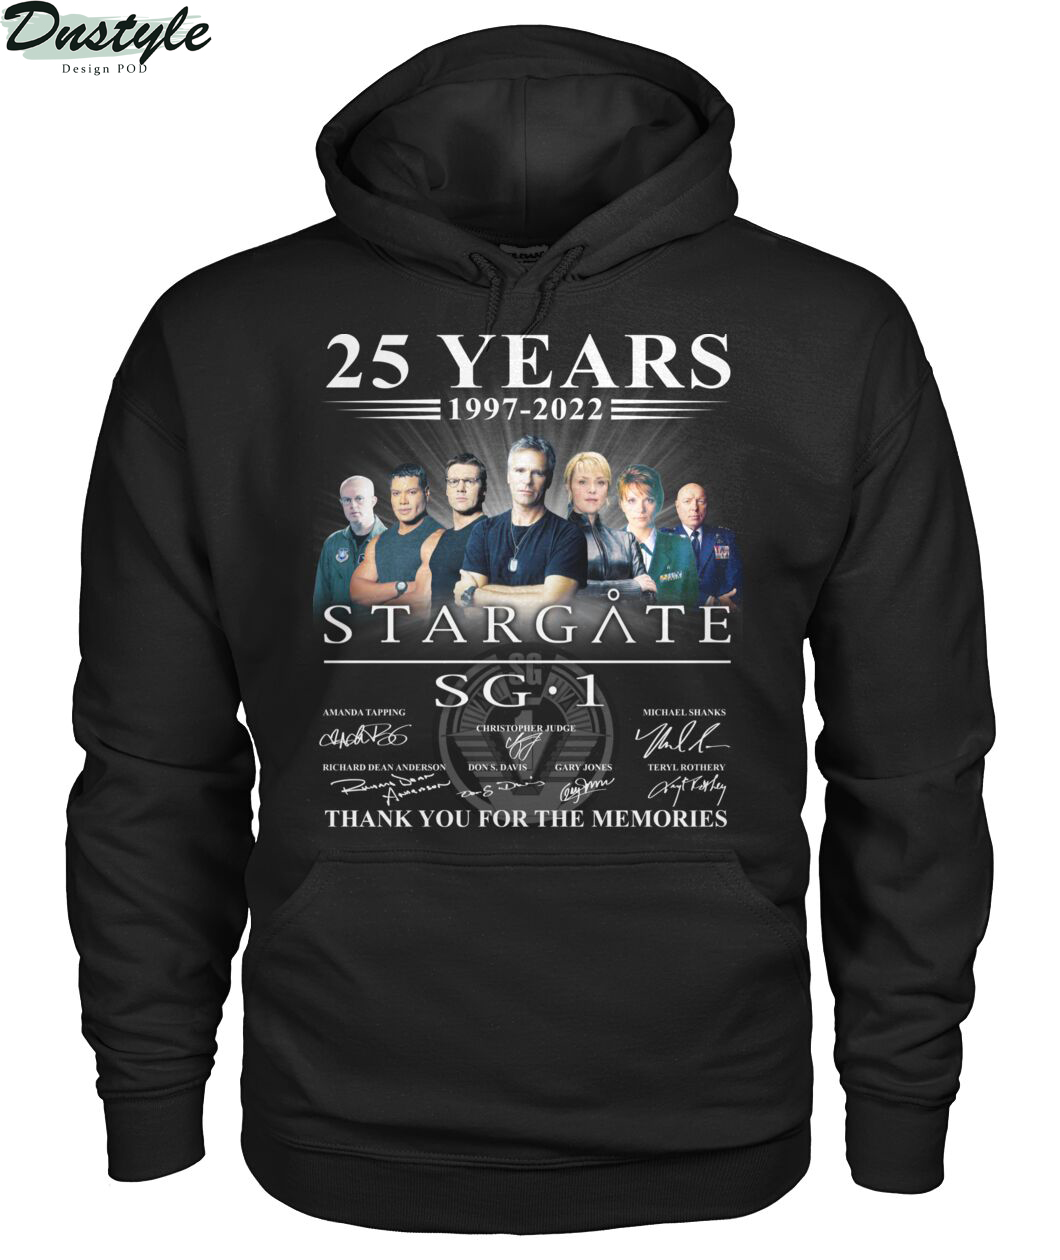 Stargate SG-1 25 years 1977-2021 thank you for the memories hoodie